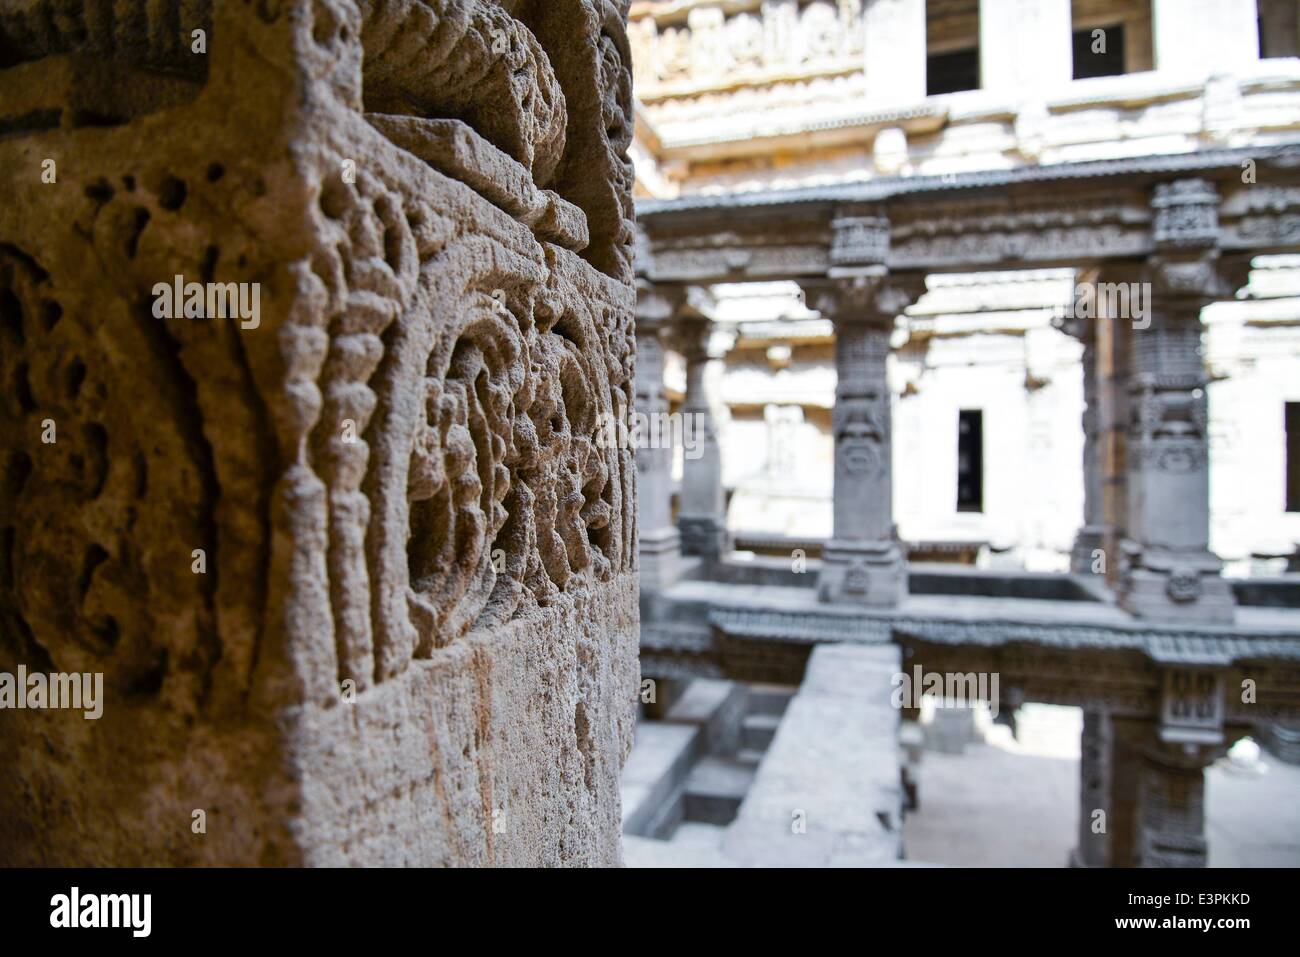 The intricate carvings on the structures of 'Rani-ki-Vav'. Rani Ki Vav is one of the finest stepwells in India. It is a stepwell in Gujarat built in the 11th century in memory of King Bhimdev I of the Solanki dynasty. The stepwell was approved by UNESCO as World Heritage Site for its exceptional example of technological development in utilizing ground water resources. (Photo by Nisarg Lakhamani/Pacific Press) Stock Photo